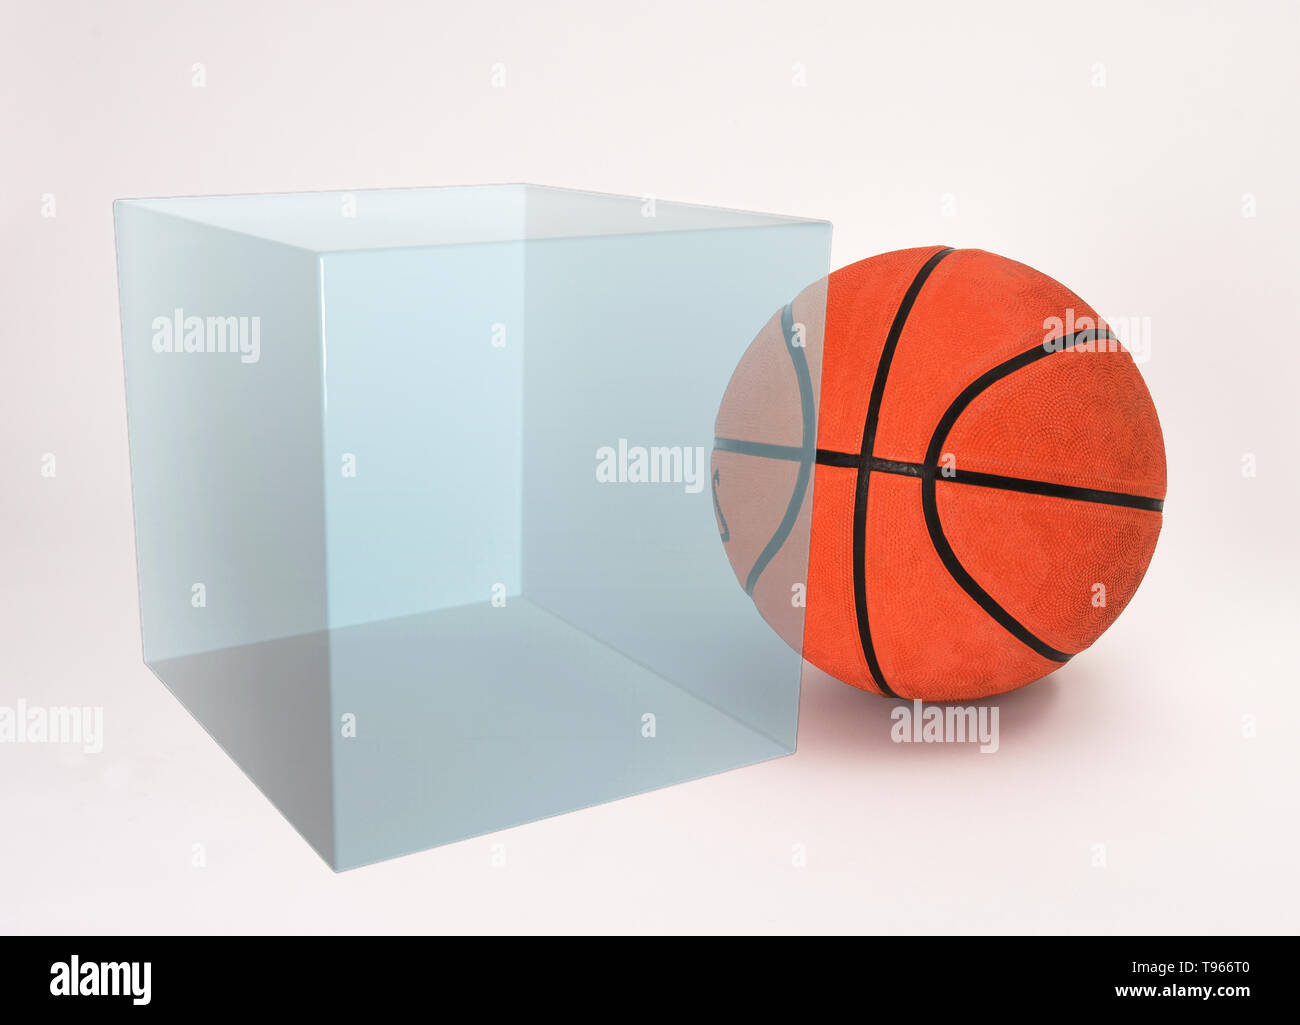 The box contains 1 mole of gas; the molar volume of an ideal gas is 22.4 L at 0°C and 1 atm of pressure. A basketball fits loosely into a box having this volume. Stock Photo